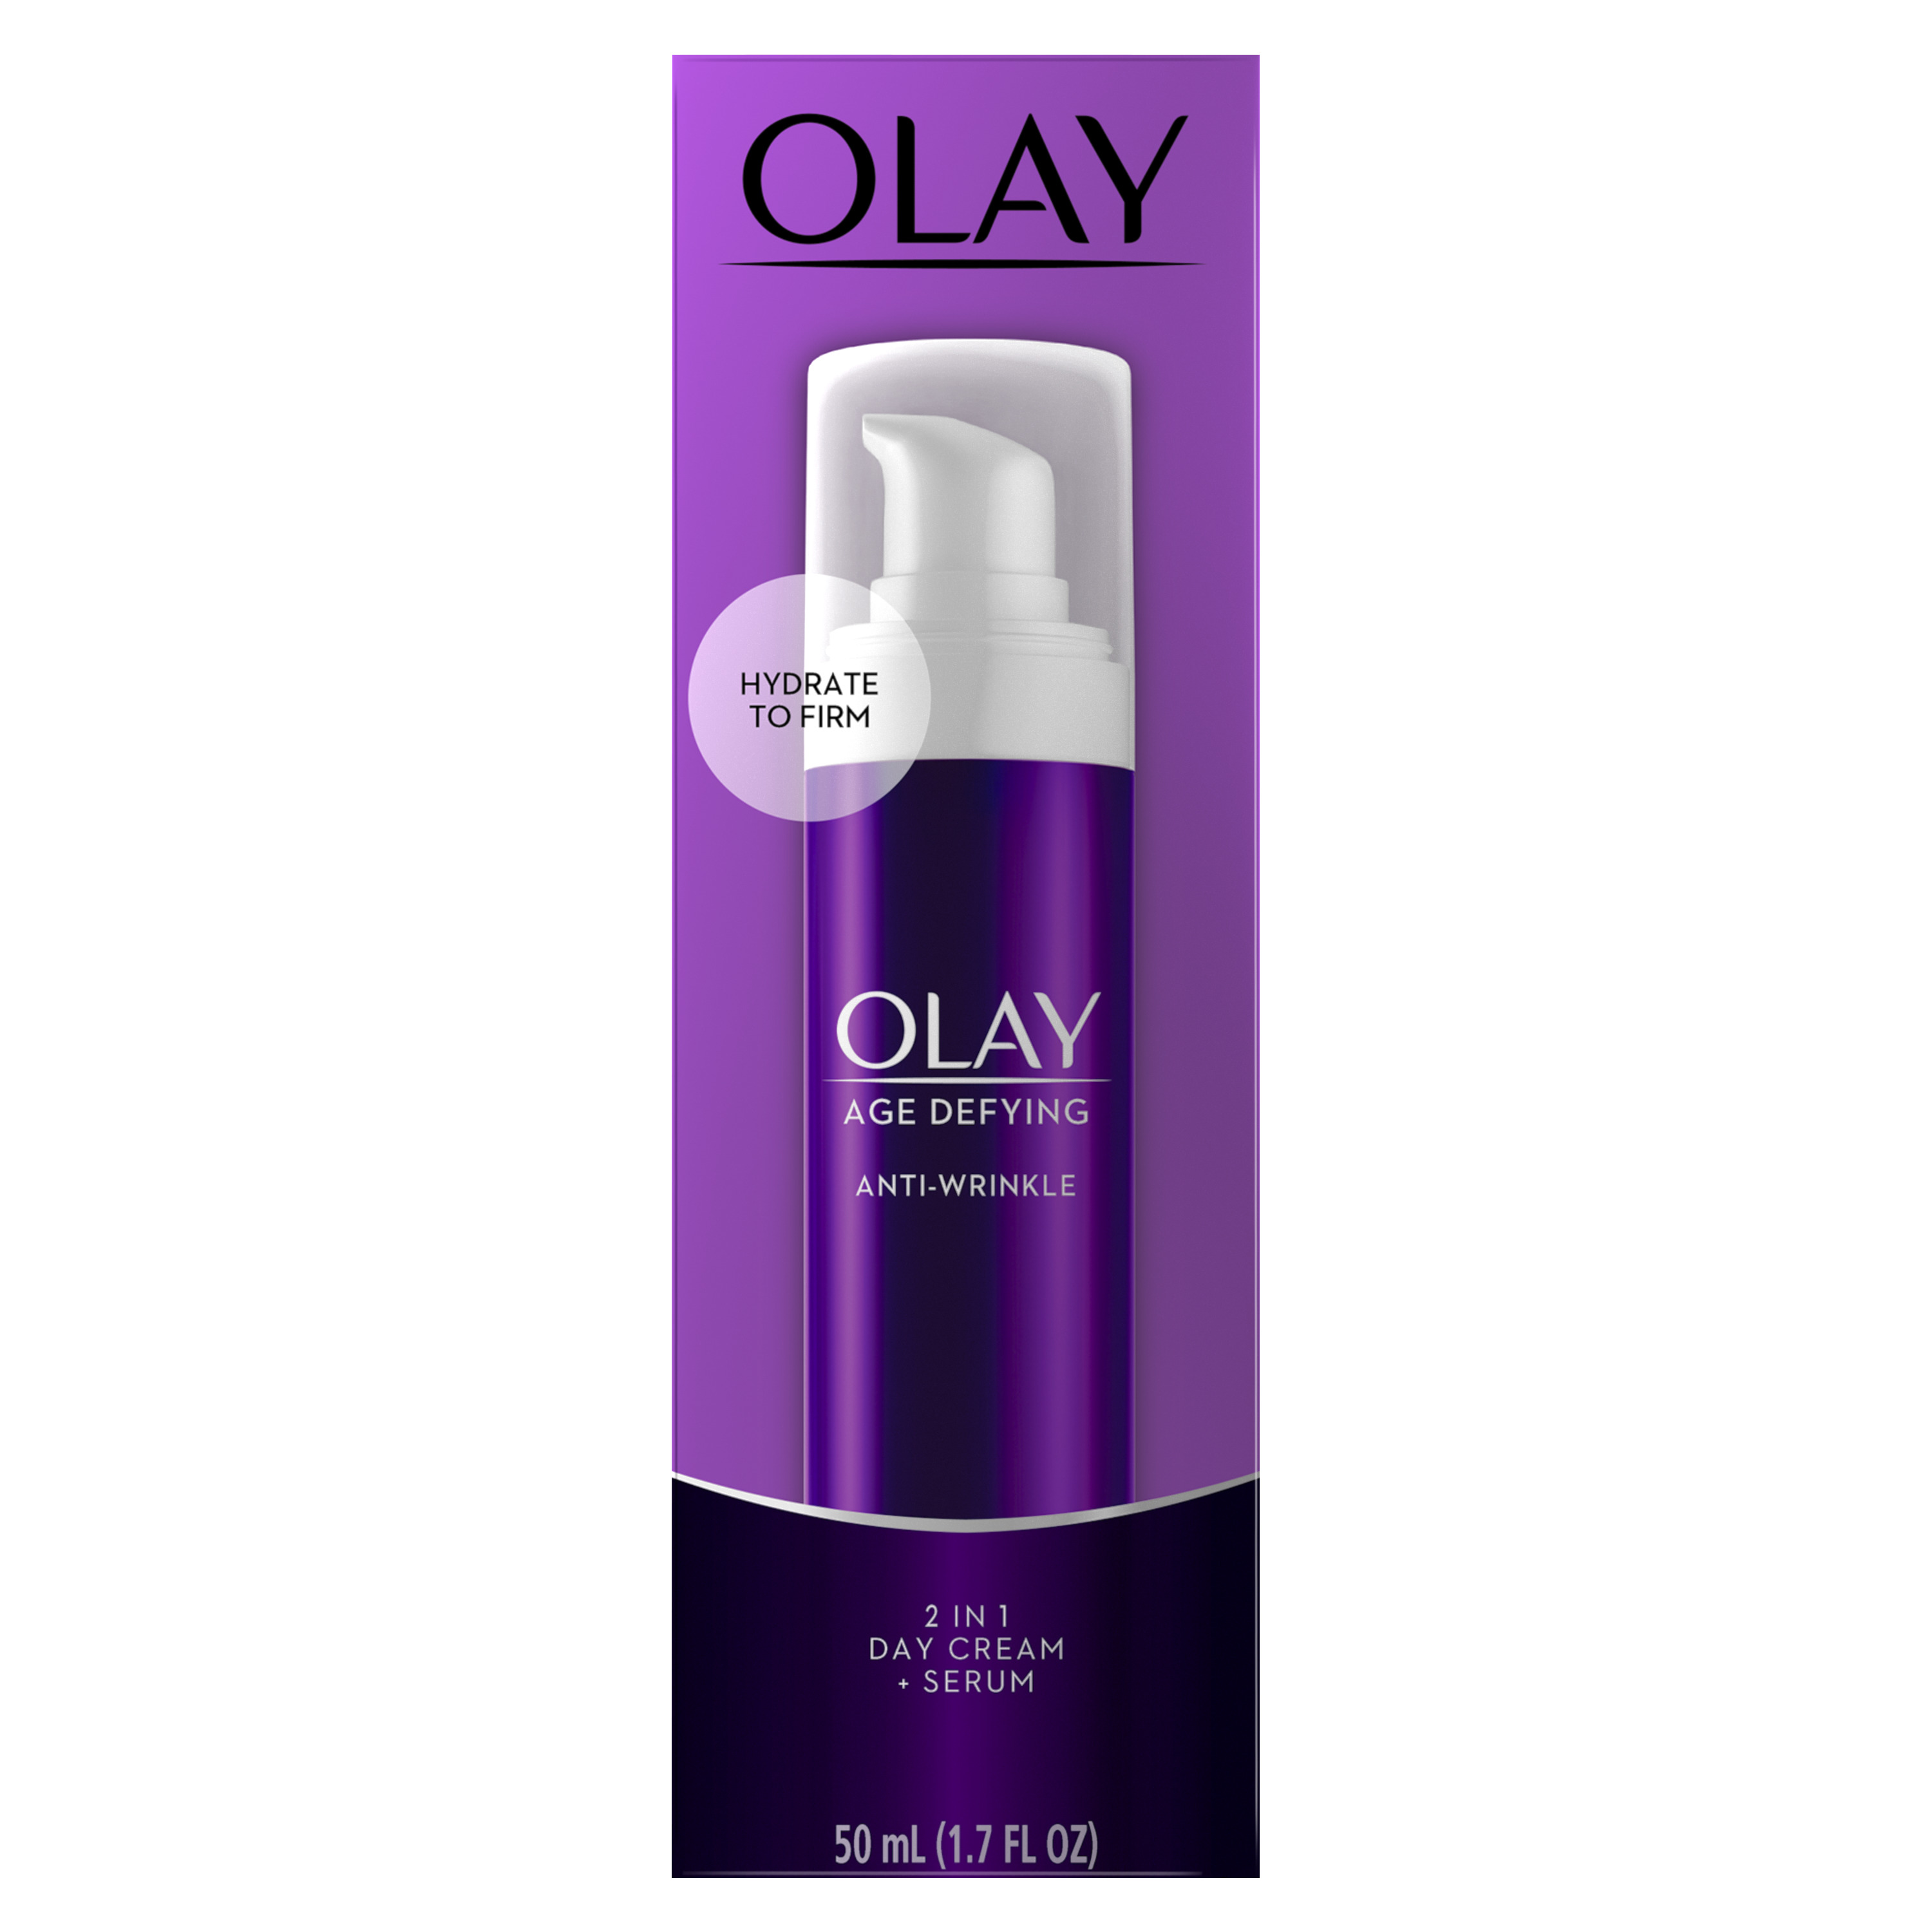 Olay Age Defying 2 in 1 Day Cream Plus Serum, Anti-Wrinkle, All Skin Types, 1.7 oz - image 3 of 9